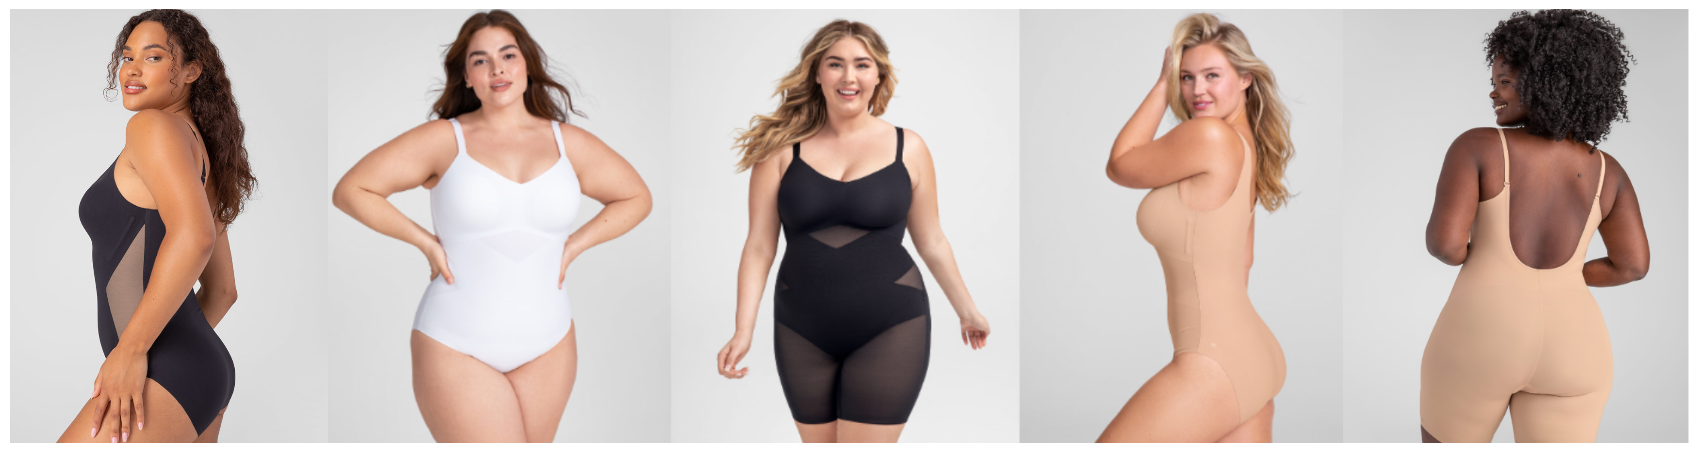 If you're trying to decide on a bodysuit from @Honeylove here are